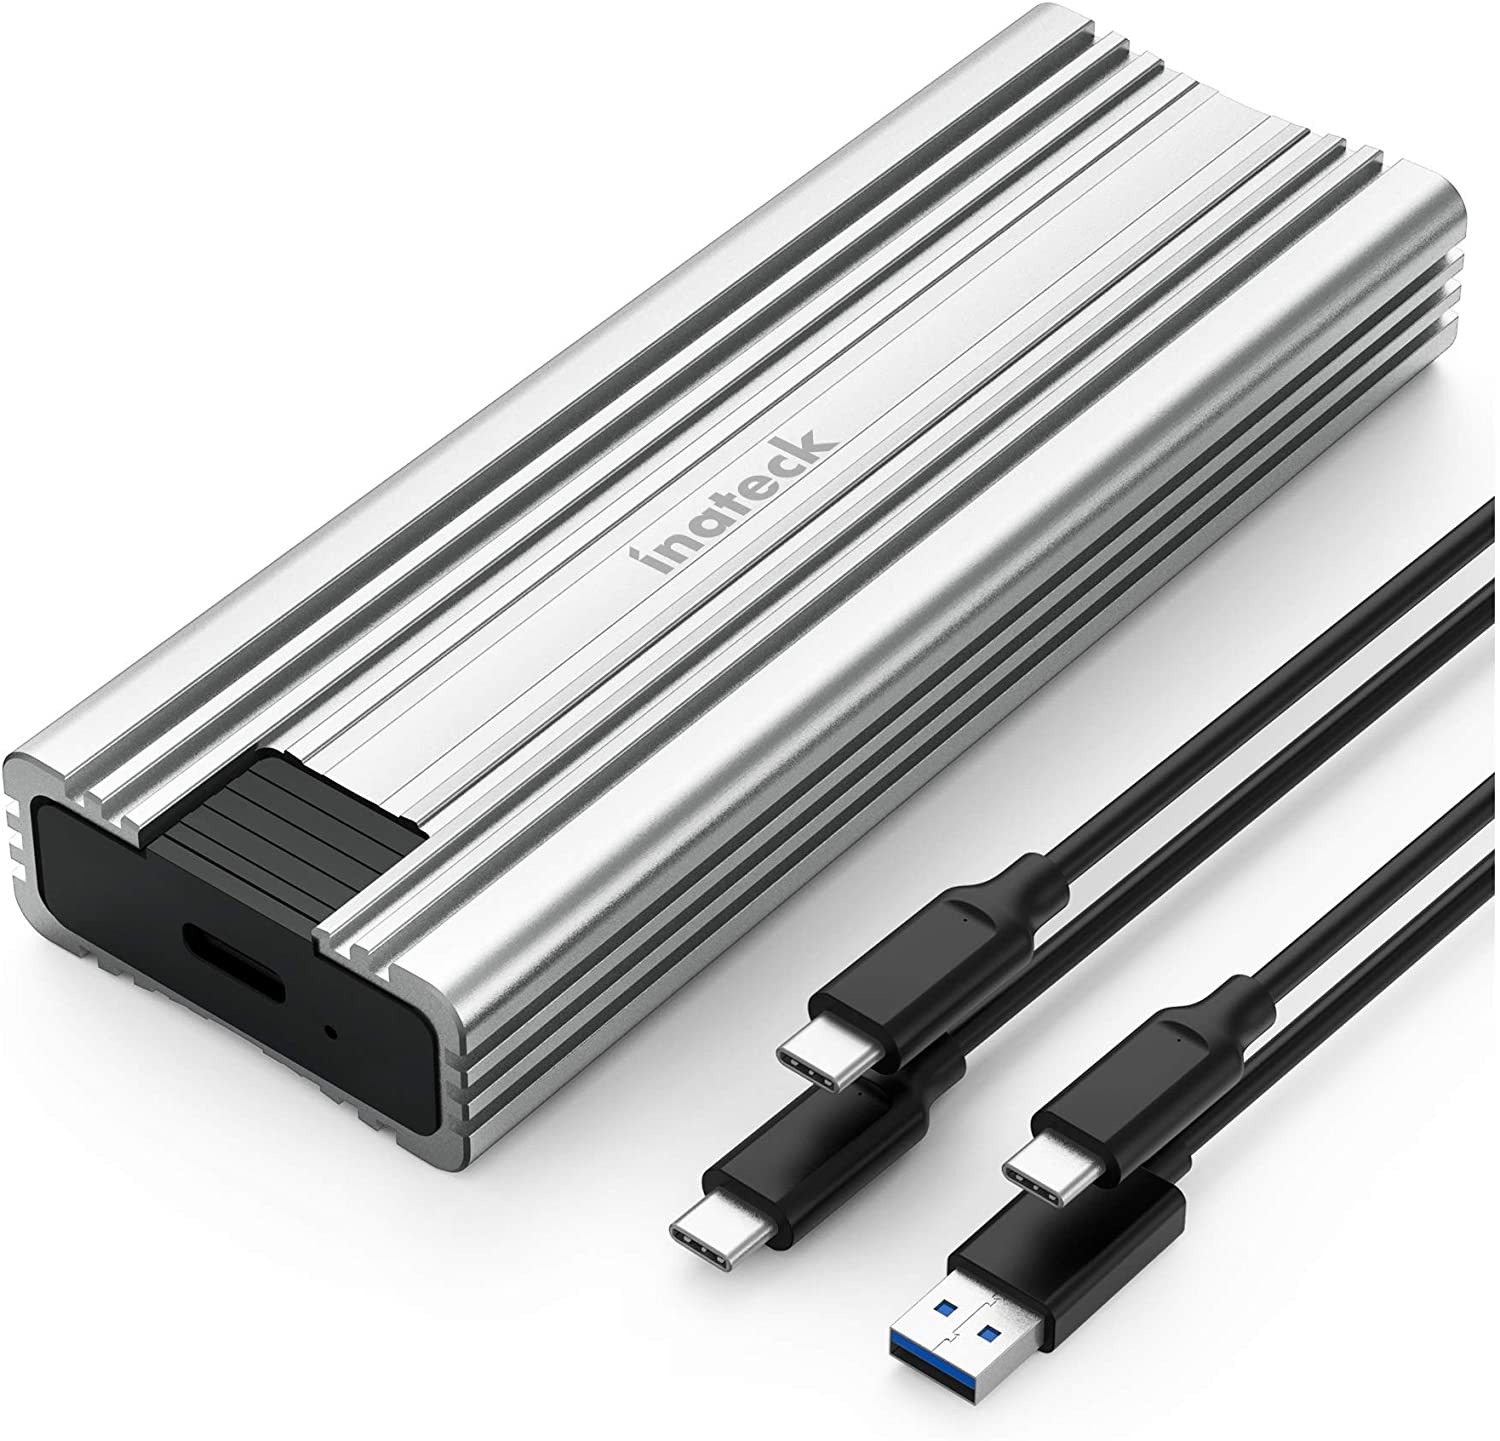 Inateck M.2 SSD ケース、USB A-CとUSB C-Cケーブル付きNVME SSD ケース、FE2025 - Inateckバックパックジャパン